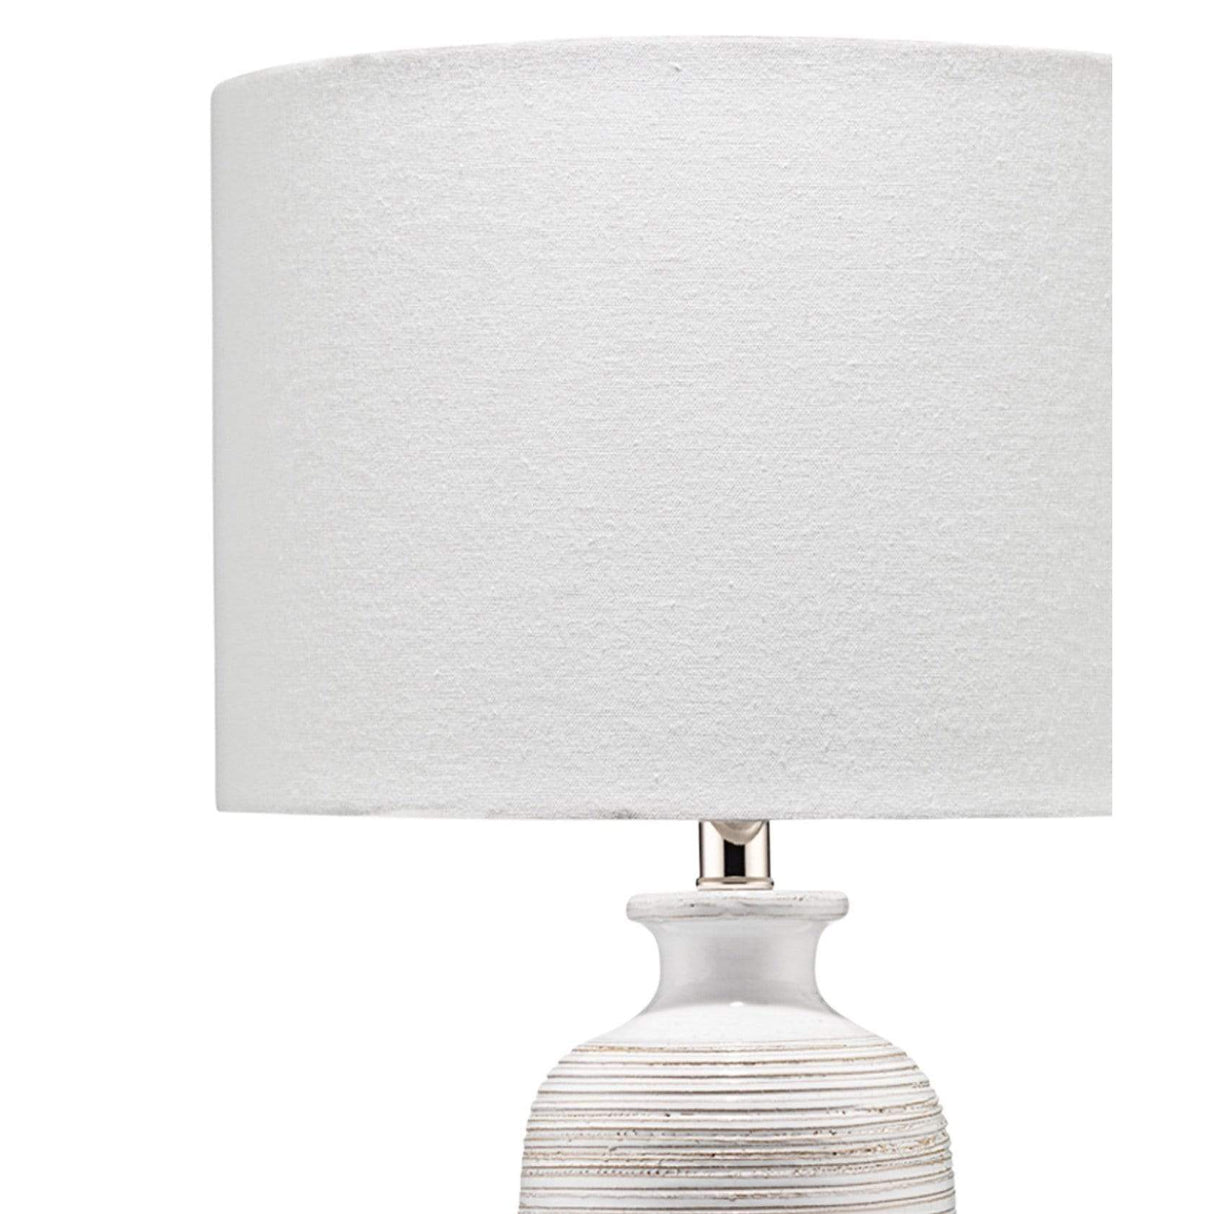 Jamie Young Co. Ashwell Table Lamp Lighting jamie-young-BL217-TL7